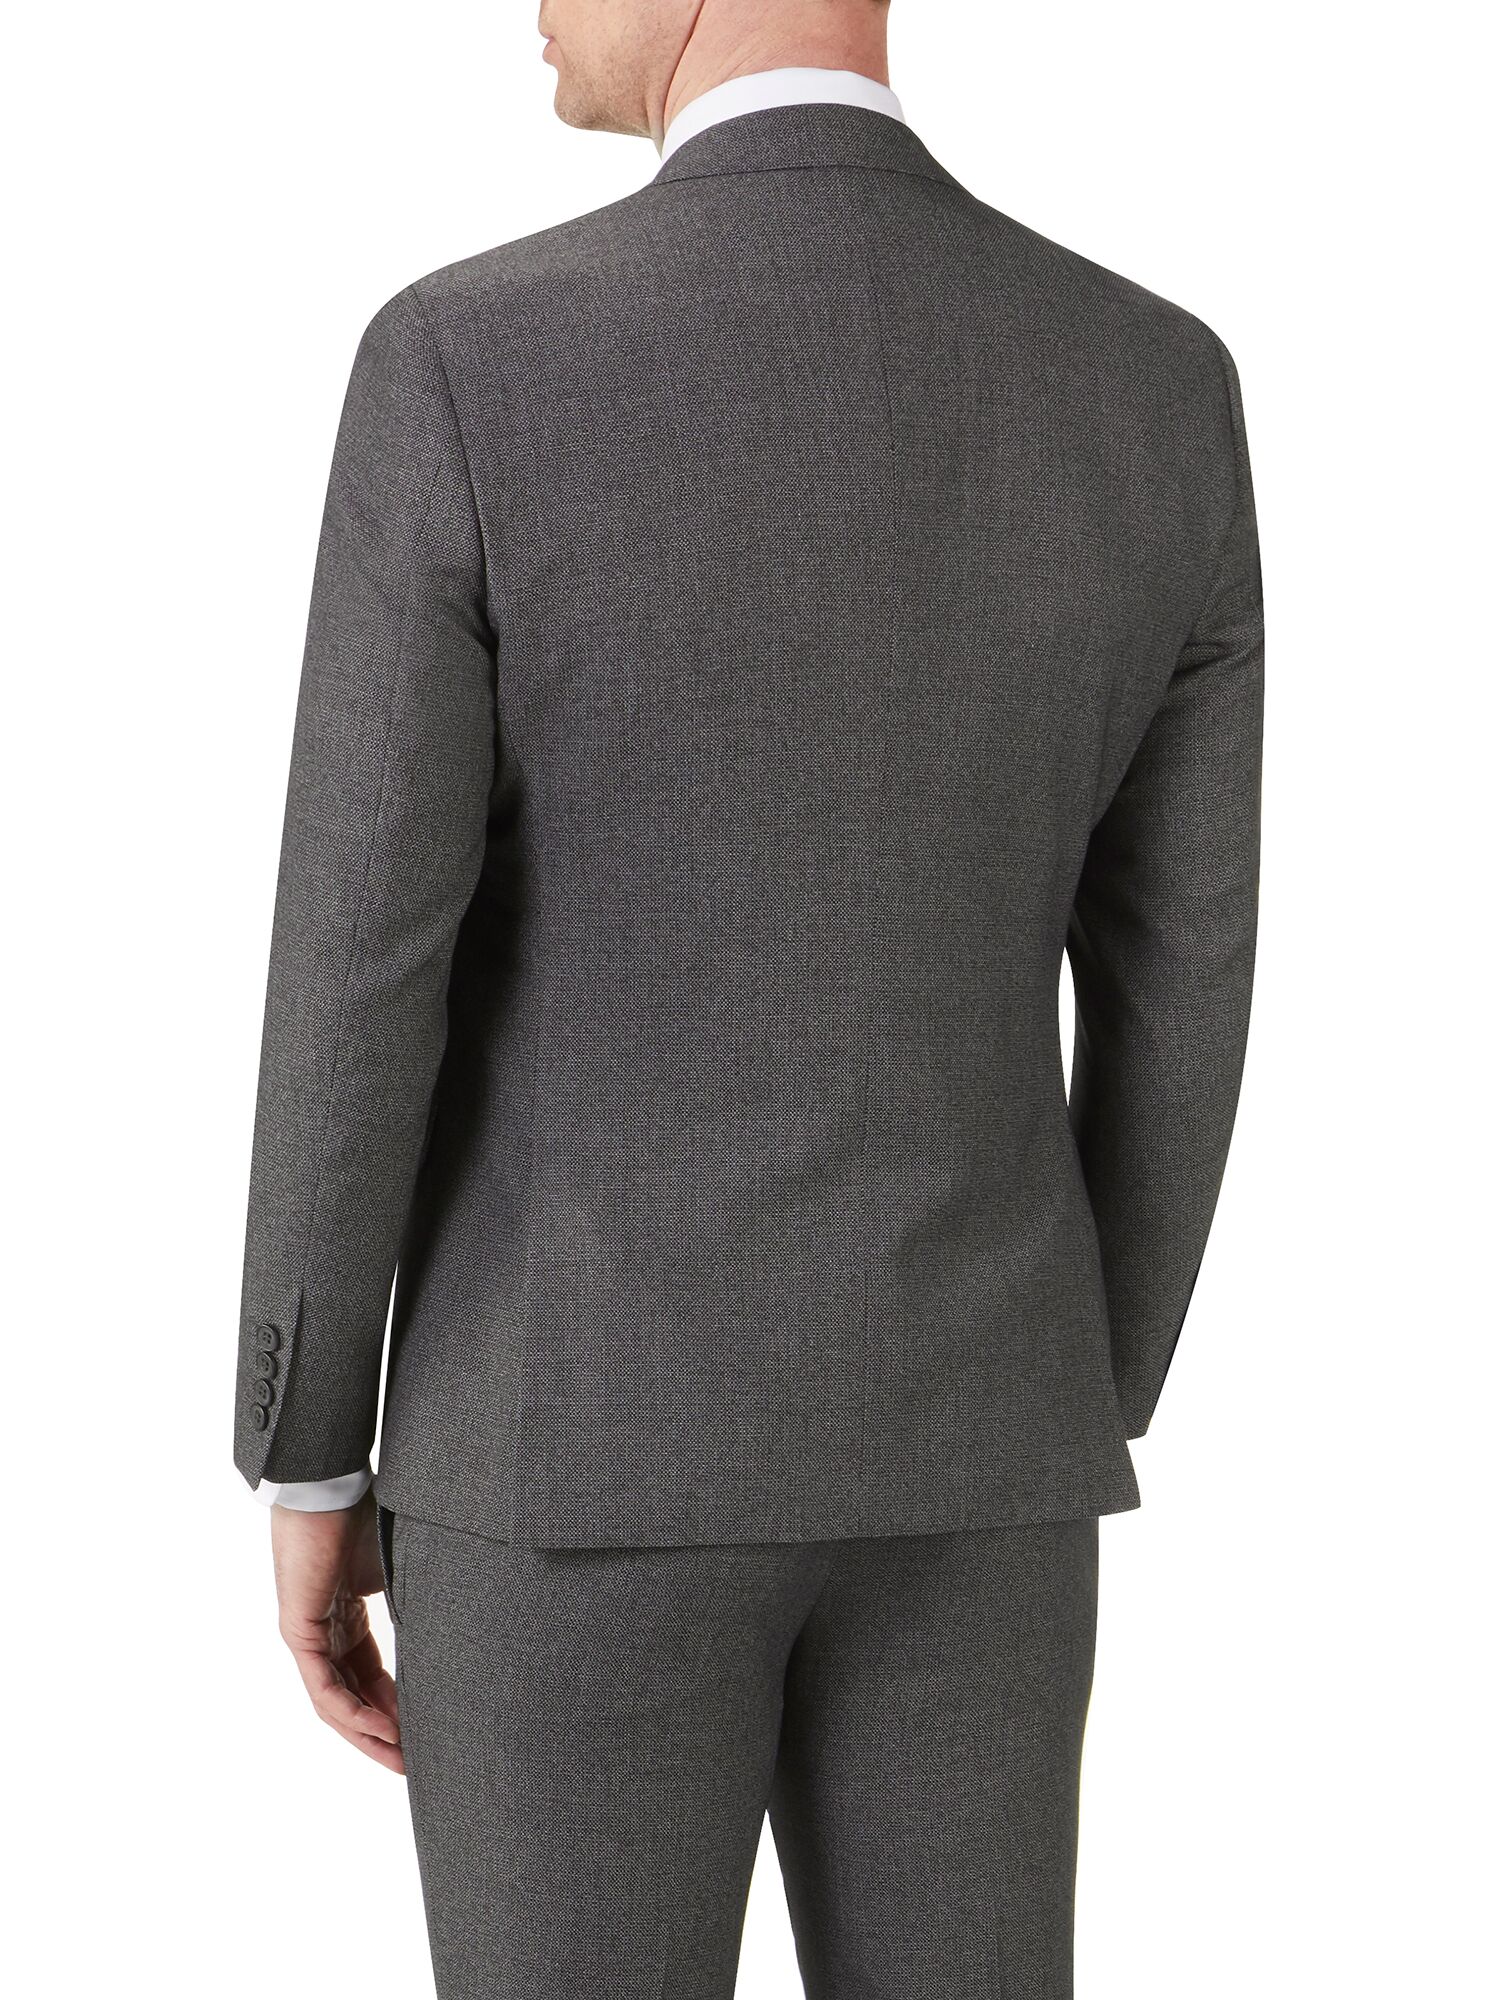 Harcourt Grey Tailored Fit Suit - 4 The Wedding